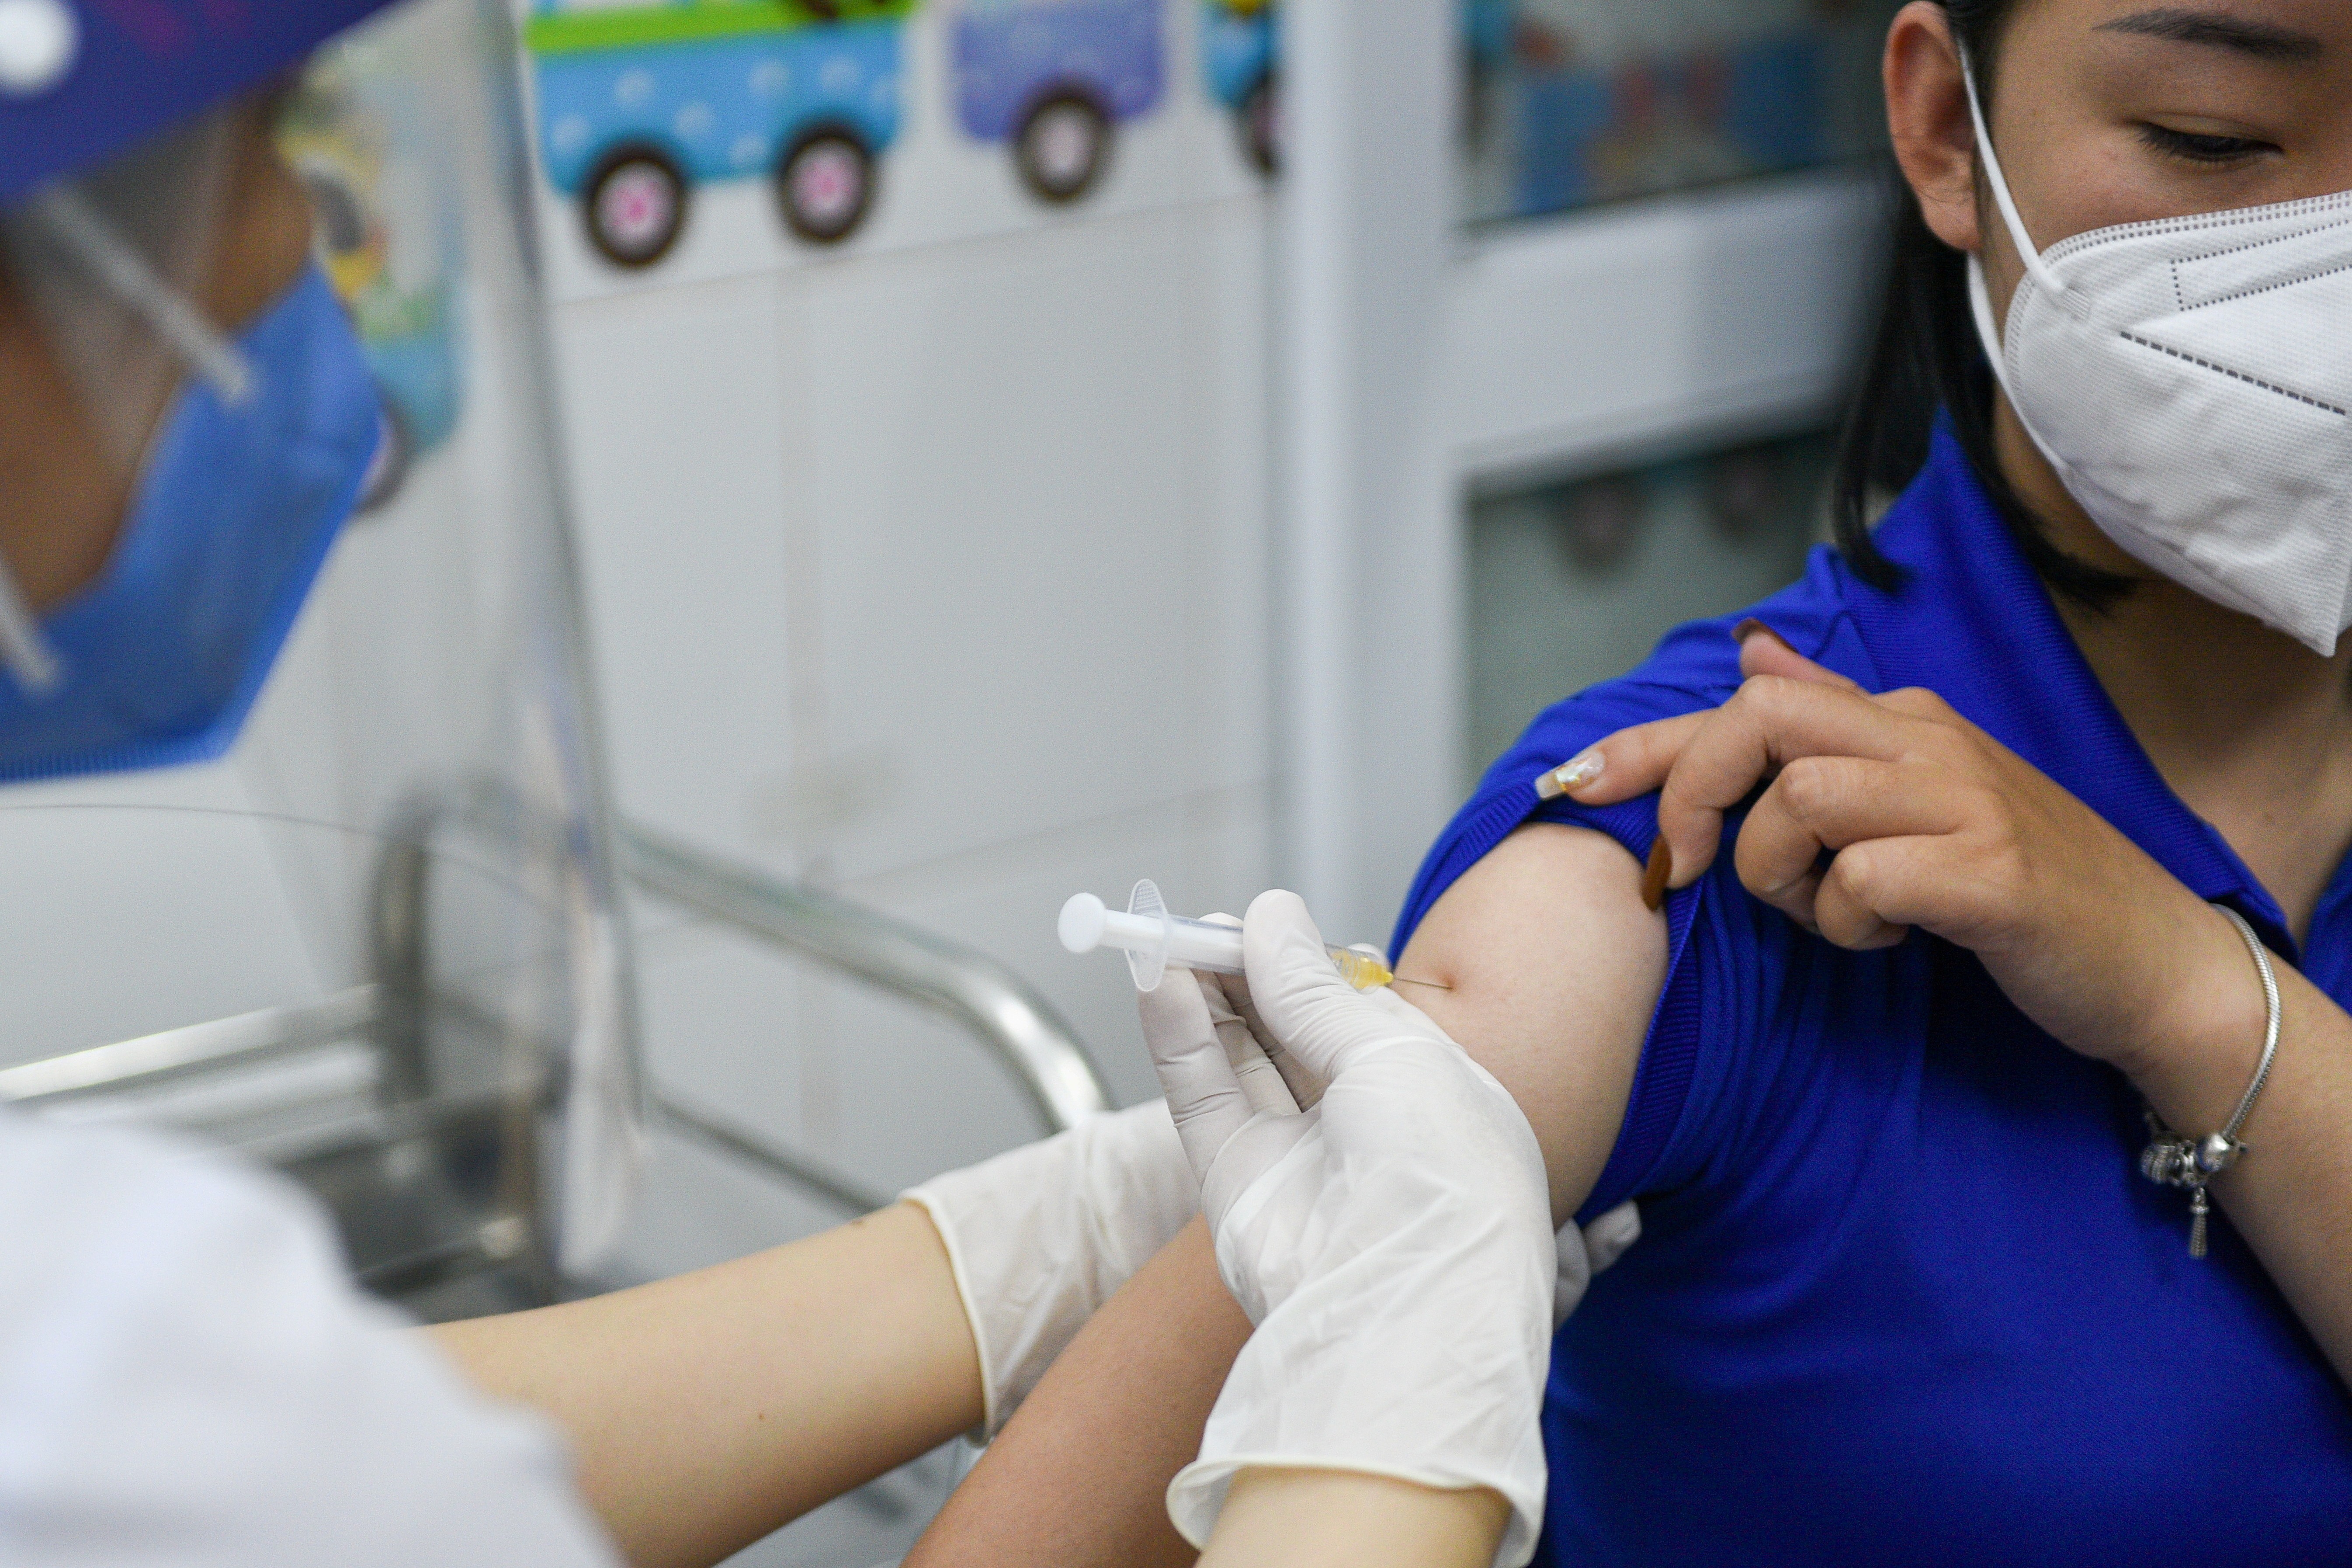 FILE PHOTO: A woman receives a vaccine as Vietnam starts its official rollout of AstraZeneca's COVID-19 vaccine, in Hai Duong